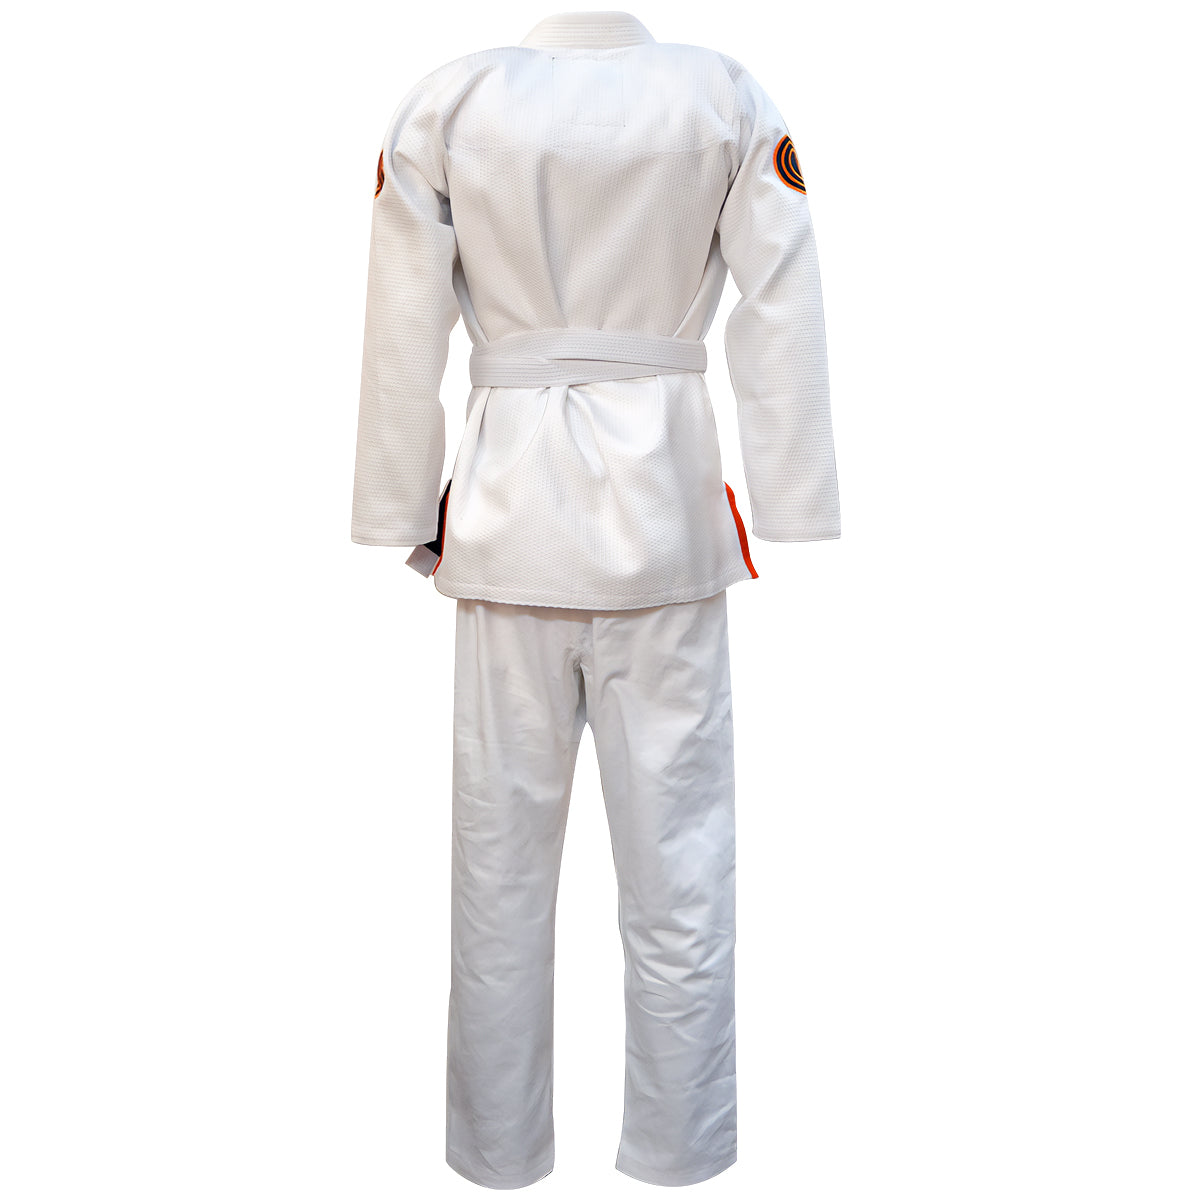 Chaos and Order Base Label V2 BJJ Gi - White Chaos and Order